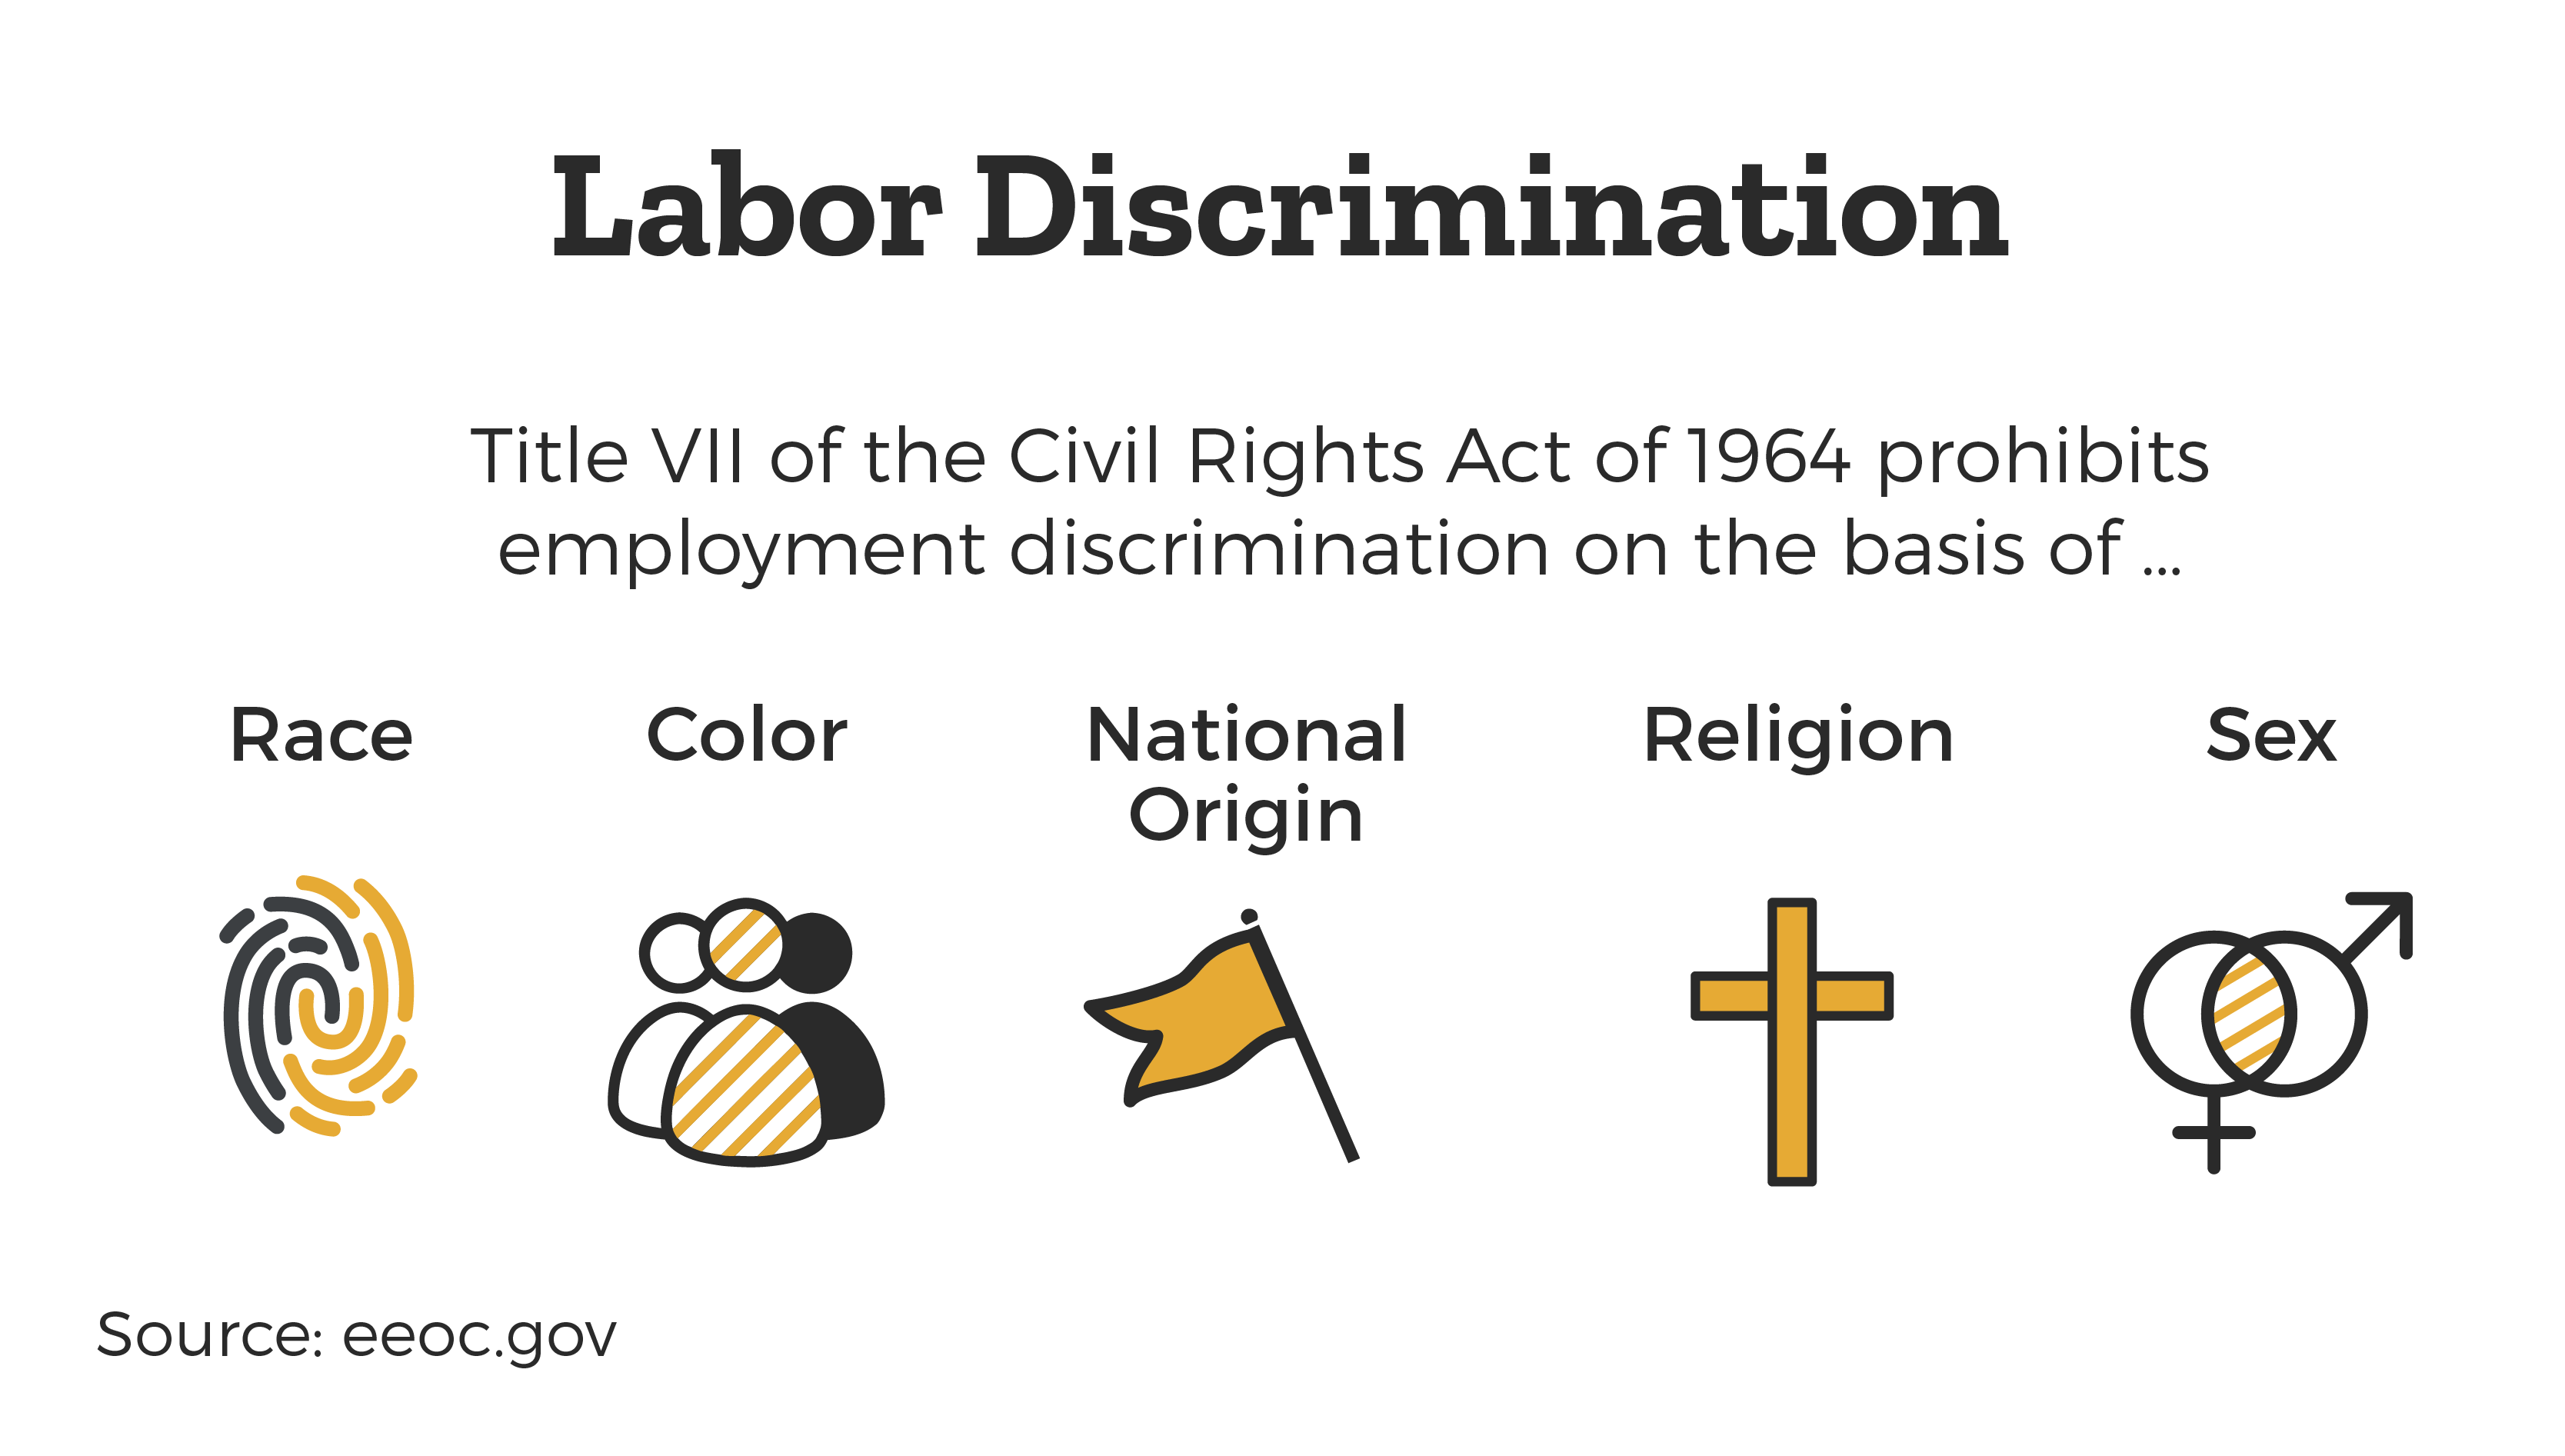 Labor Discrimination, based on Title VII of the civil rights act of 1964 prohibits employment discrimination on the basis of Race, Color, National Origin, Religion, or Sex.